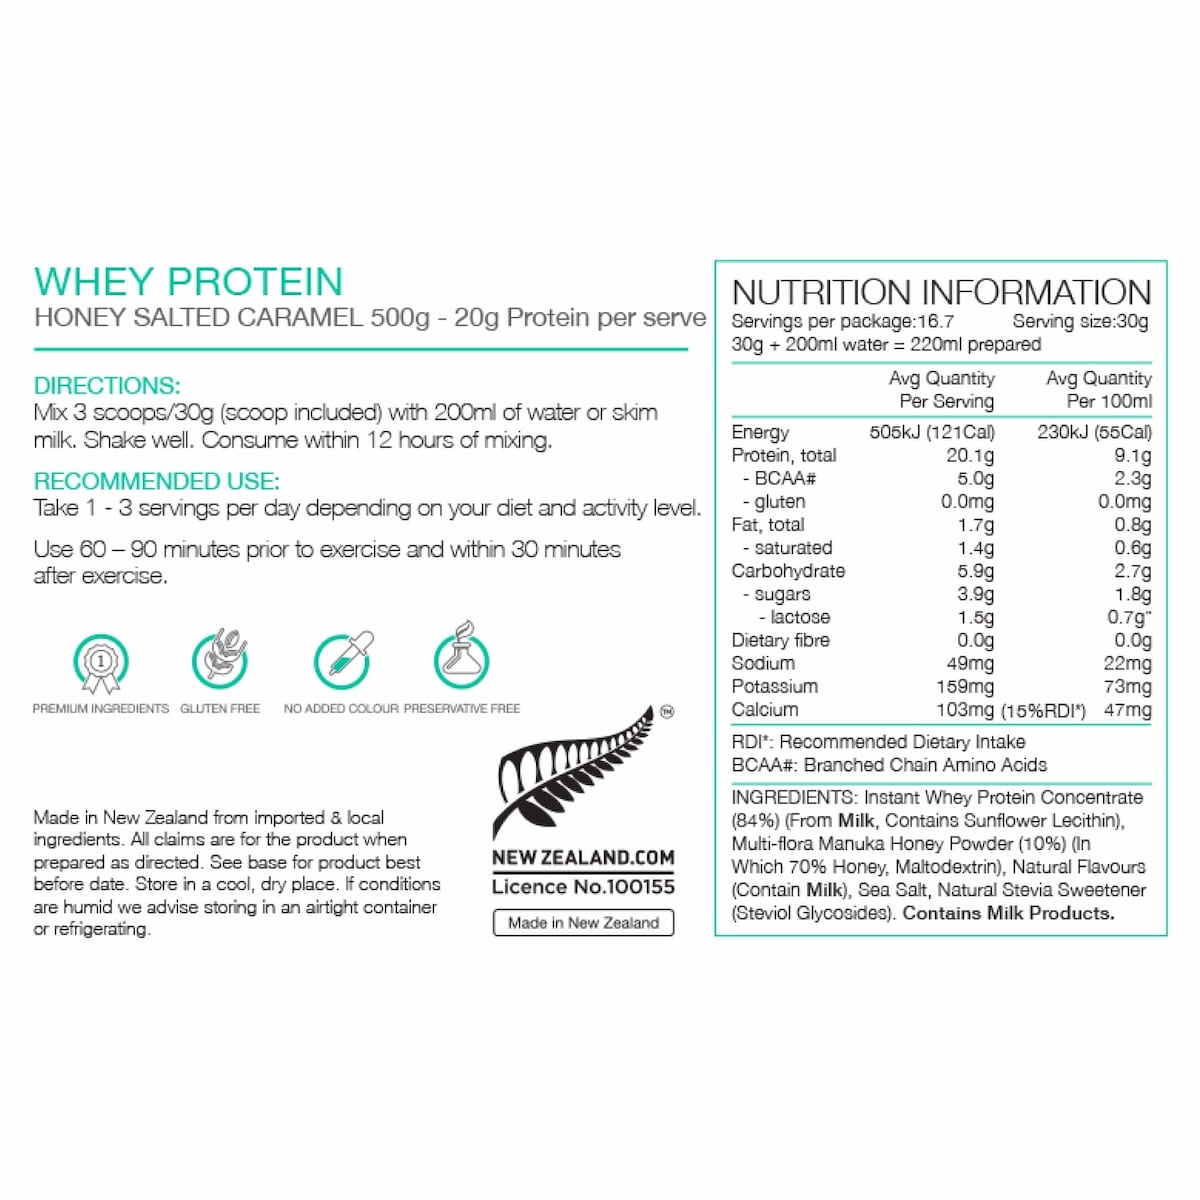 Pure Whey Protein Concentrate Salted Caramel 500g